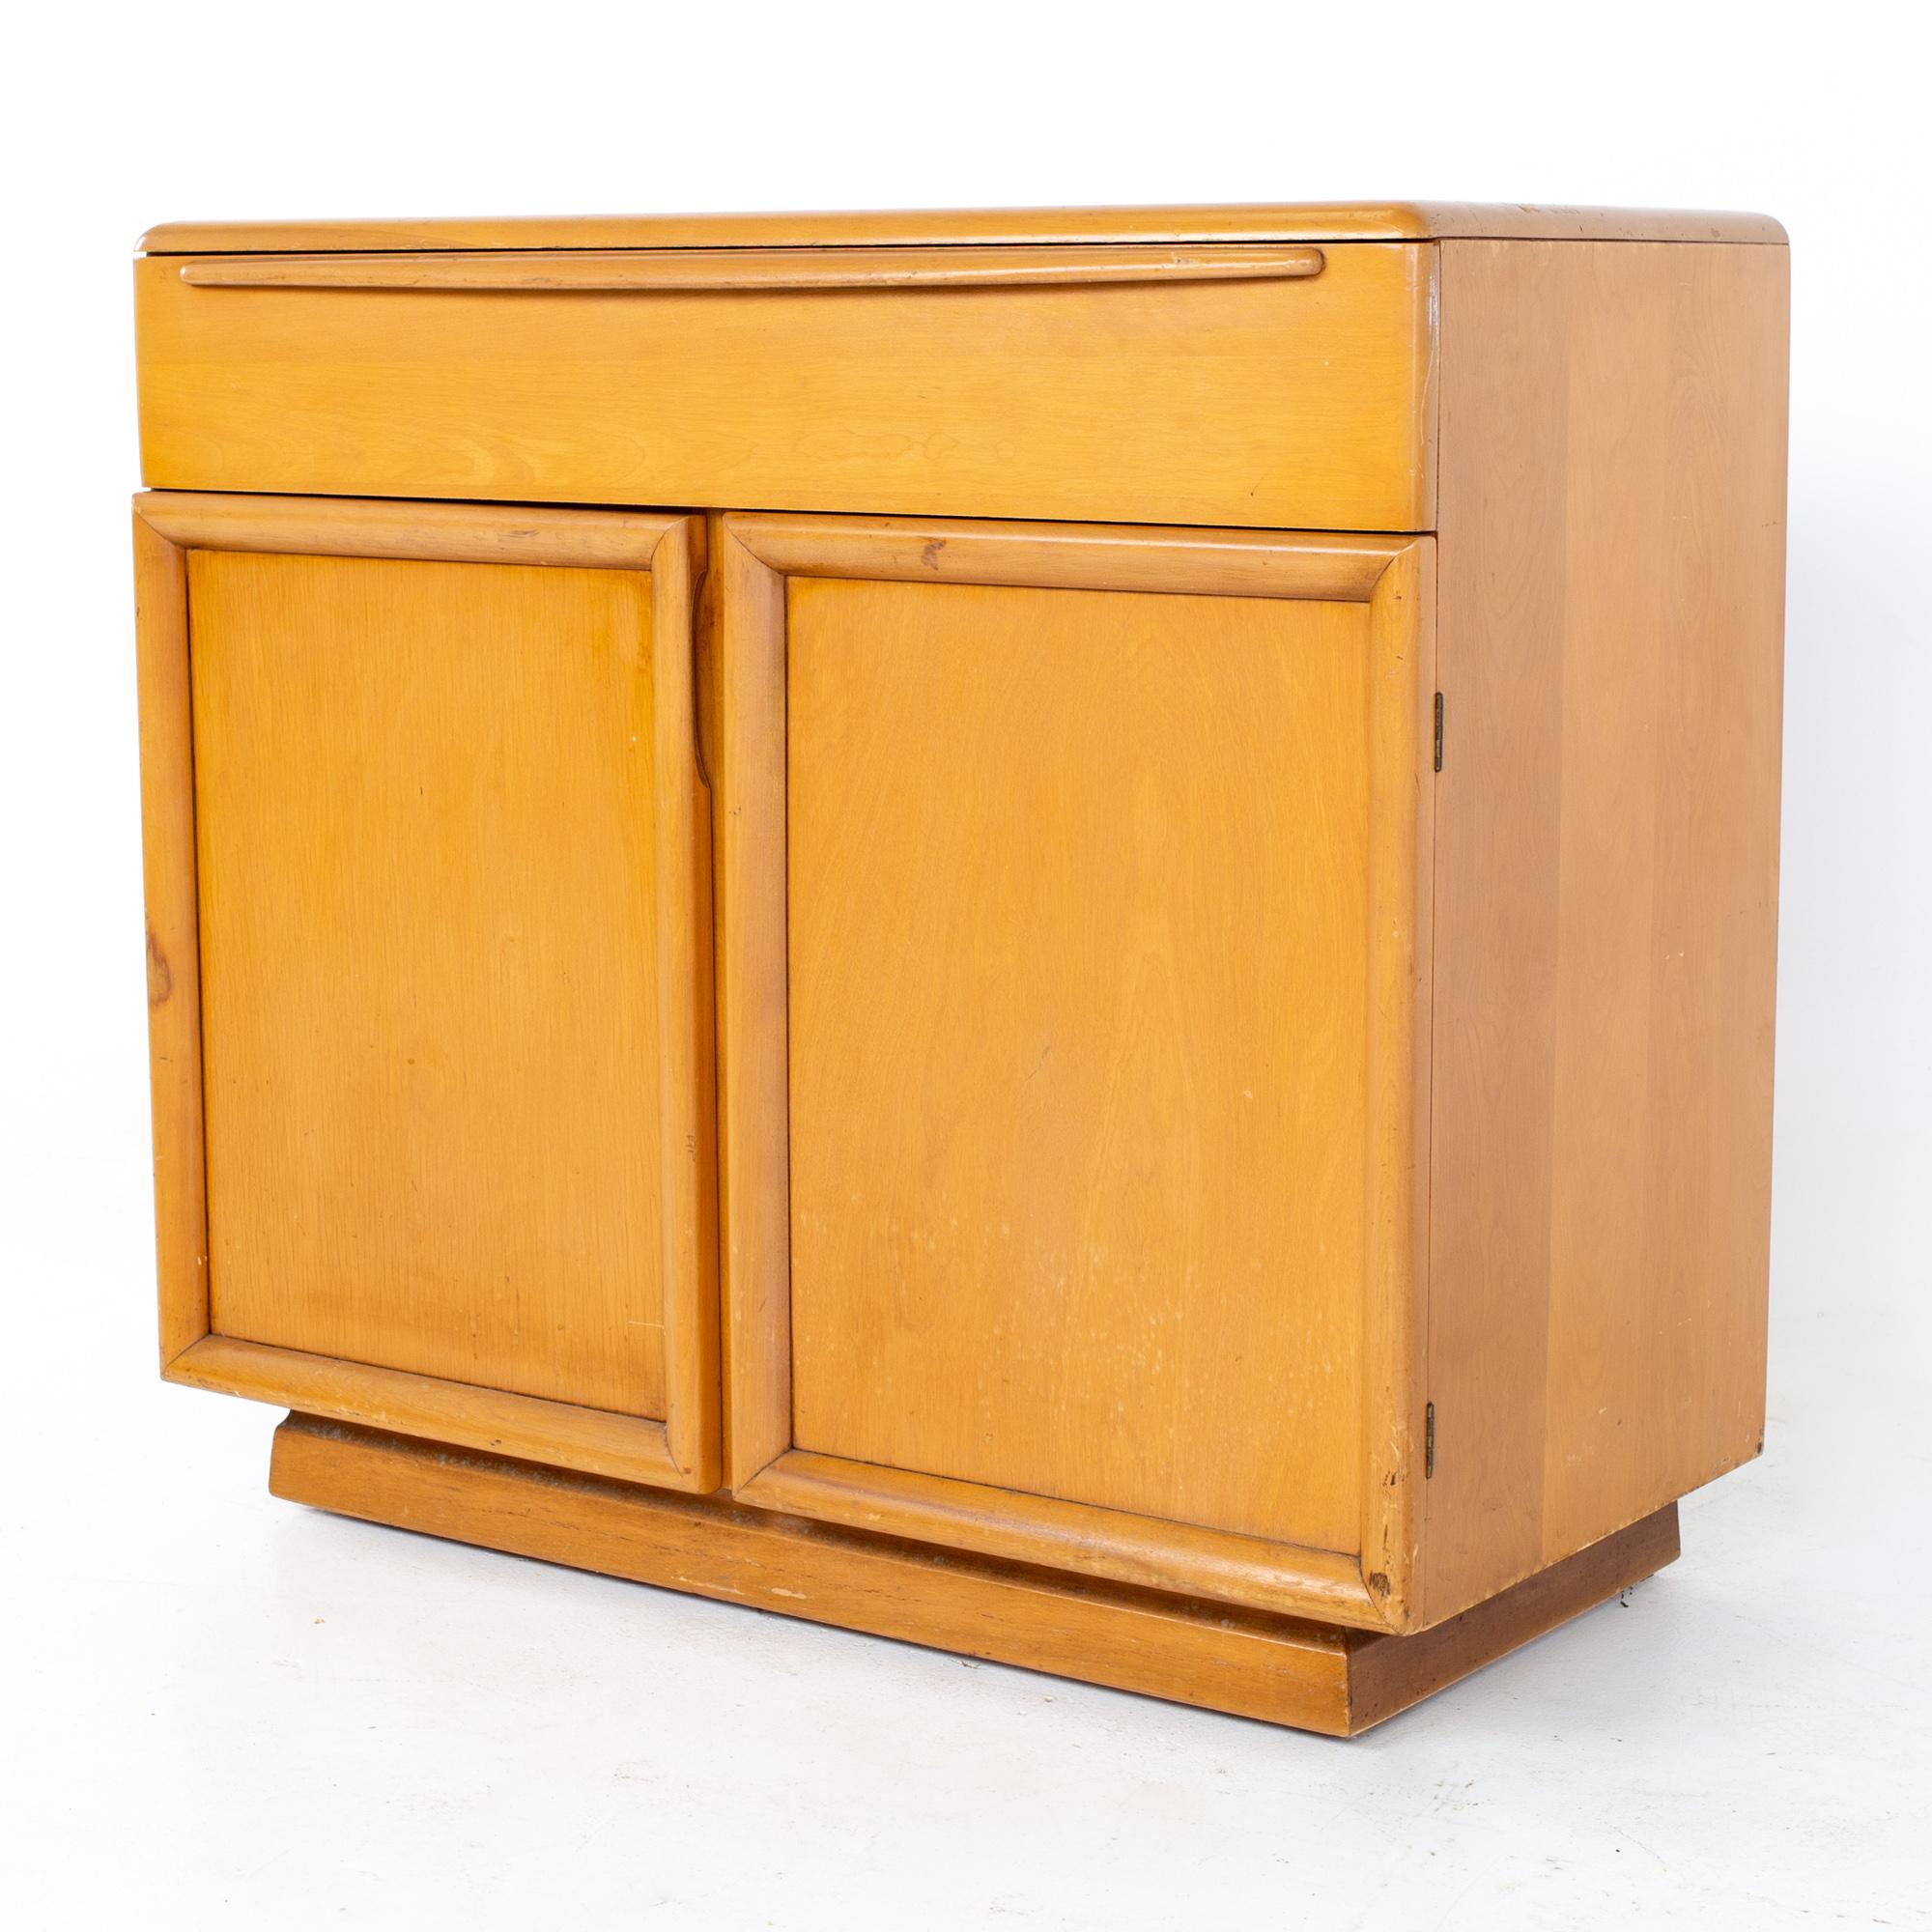 Heywood Wakefield mid century bar record sideboard buffet credenza
Credenza measures: 35.5 wide x 18 deep x 32 inches high

All pieces of furniture can be had in what we call restored vintage condition. That means the piece is restored upon